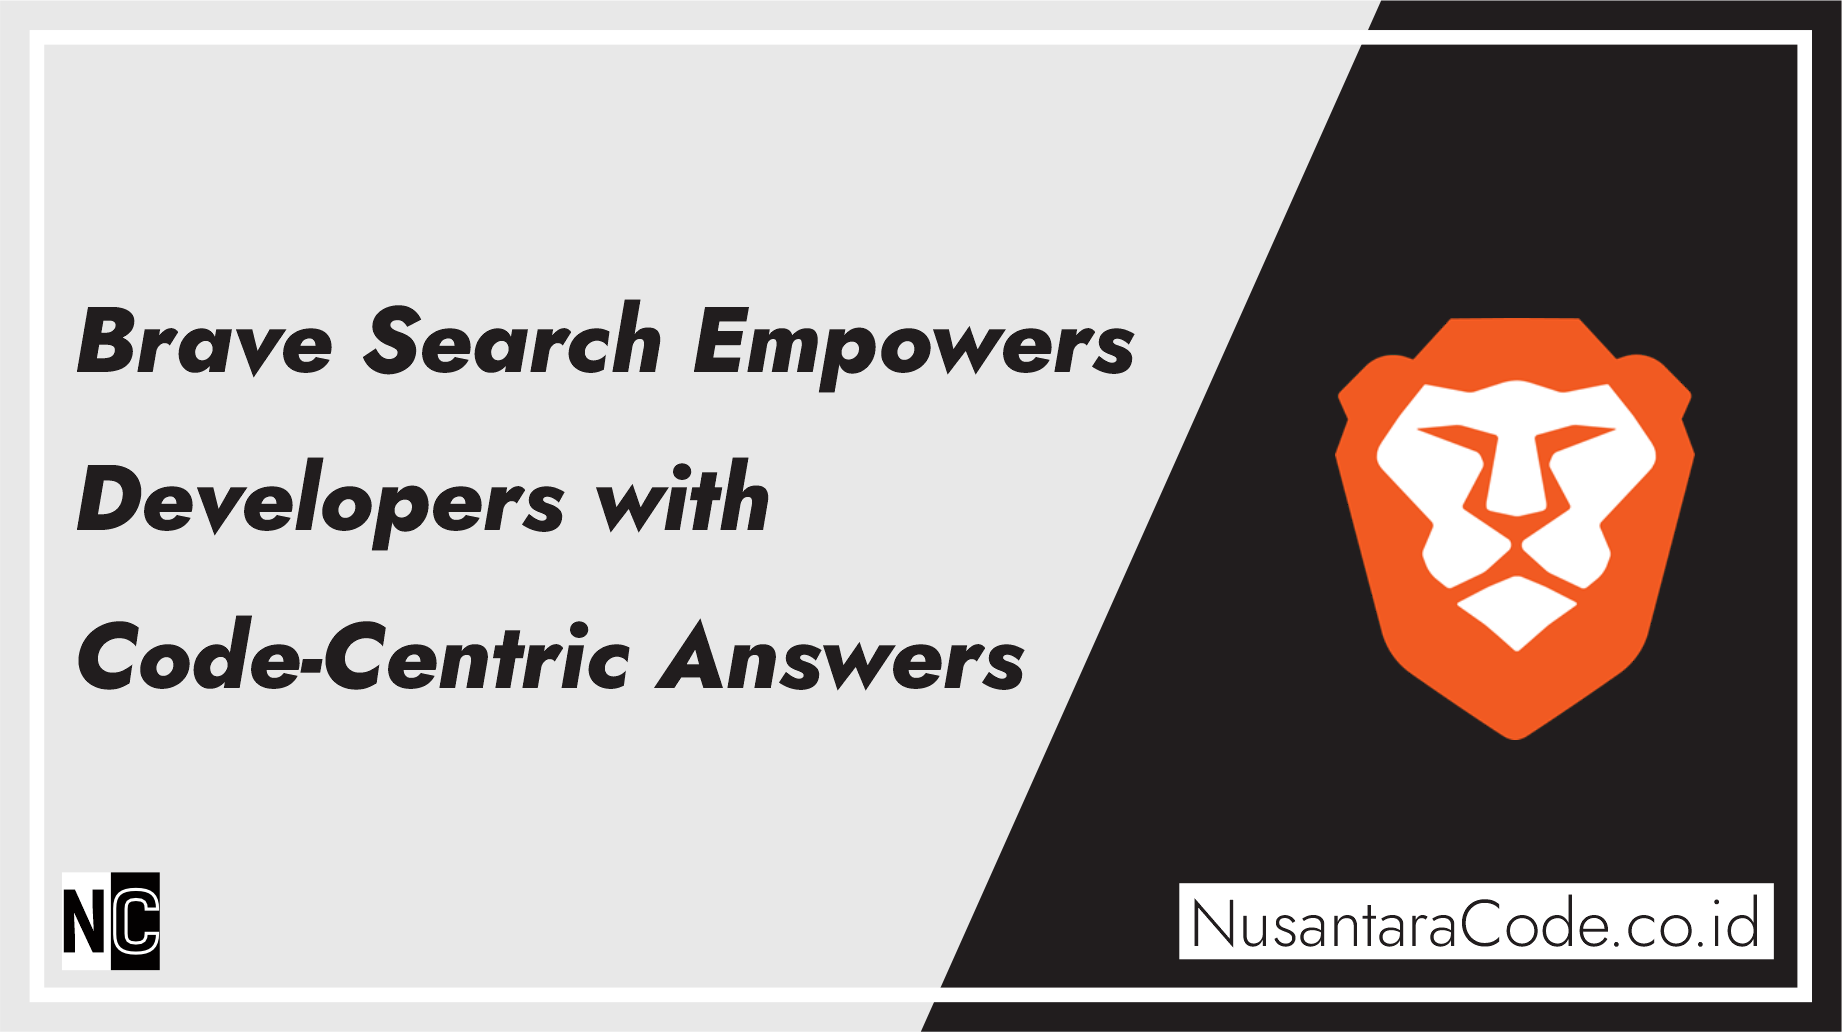 Brave Search Empowers Developers with Code-Centric Answers